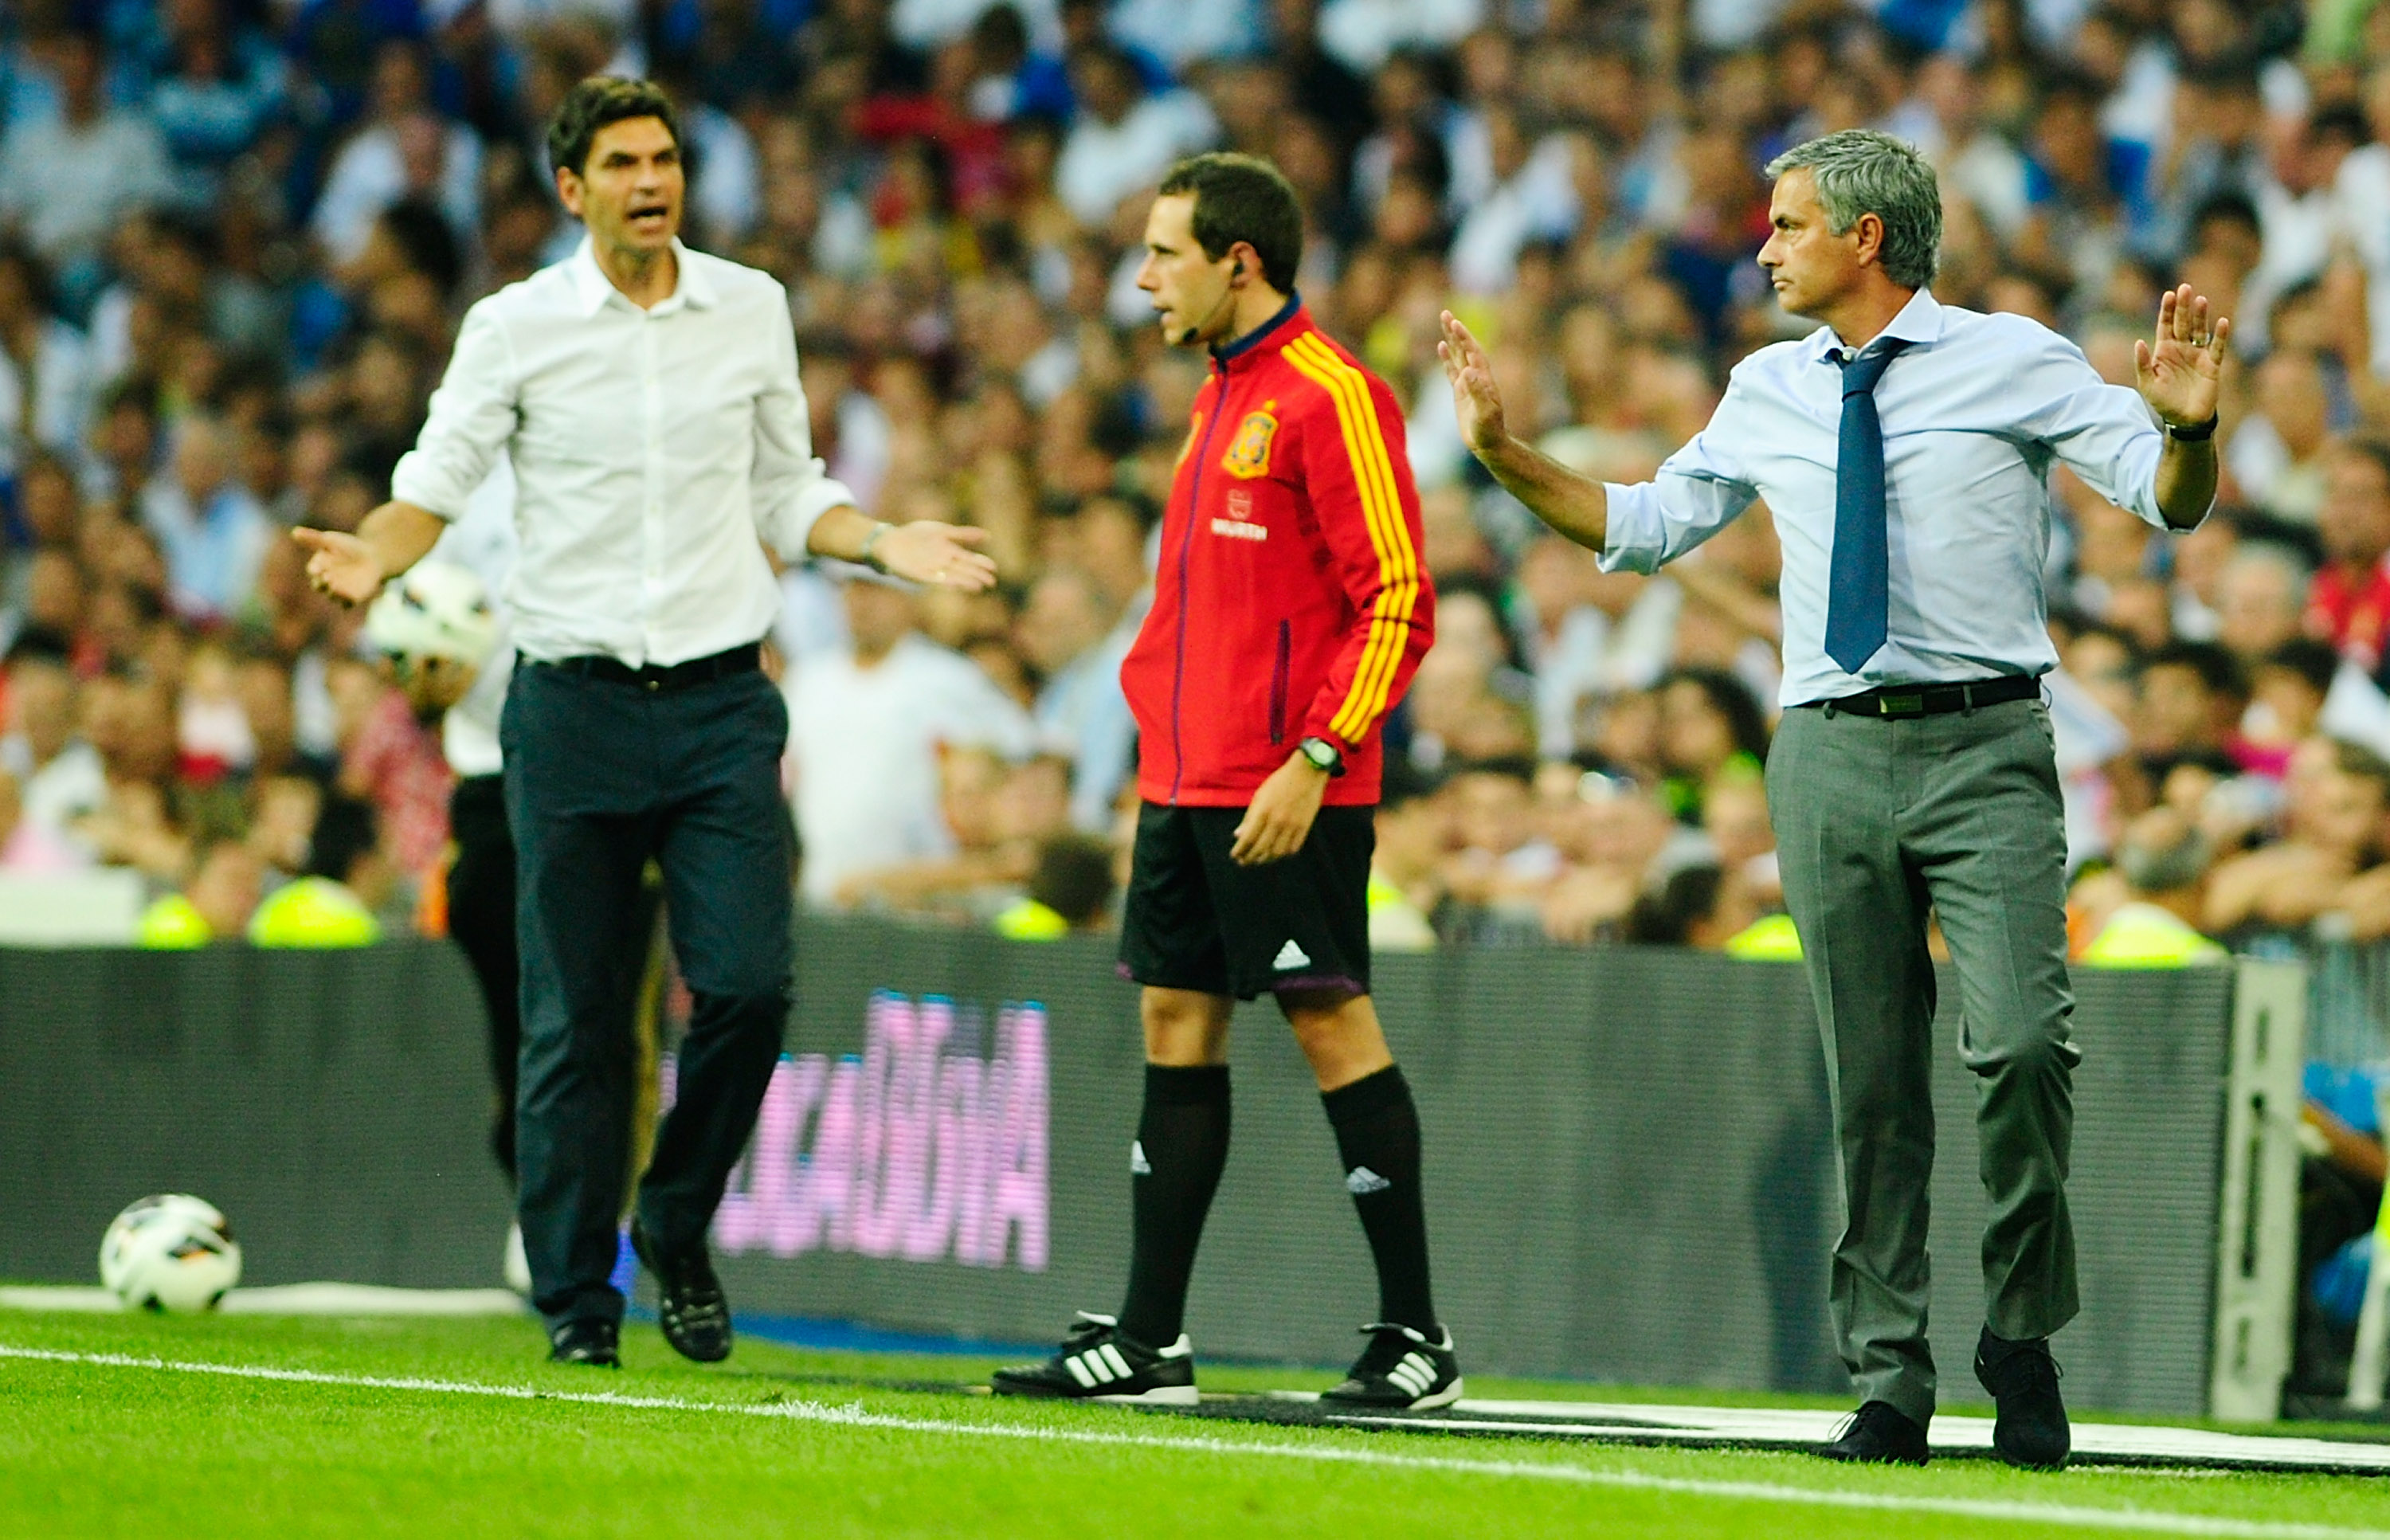 MADRID, SPAIN - AUGUST 19: head coach Jose Mourinho (R) of Real Madrid argues with head coach Mauricio Pellegrino of Valencia during the La Liga match between Real madrid and Valencia at Estadio Santiago Bernabeu on August 19, 2012 in Madrid, Spain.  (Photo by Gonzalo Arroyo Moreno/Getty Images)